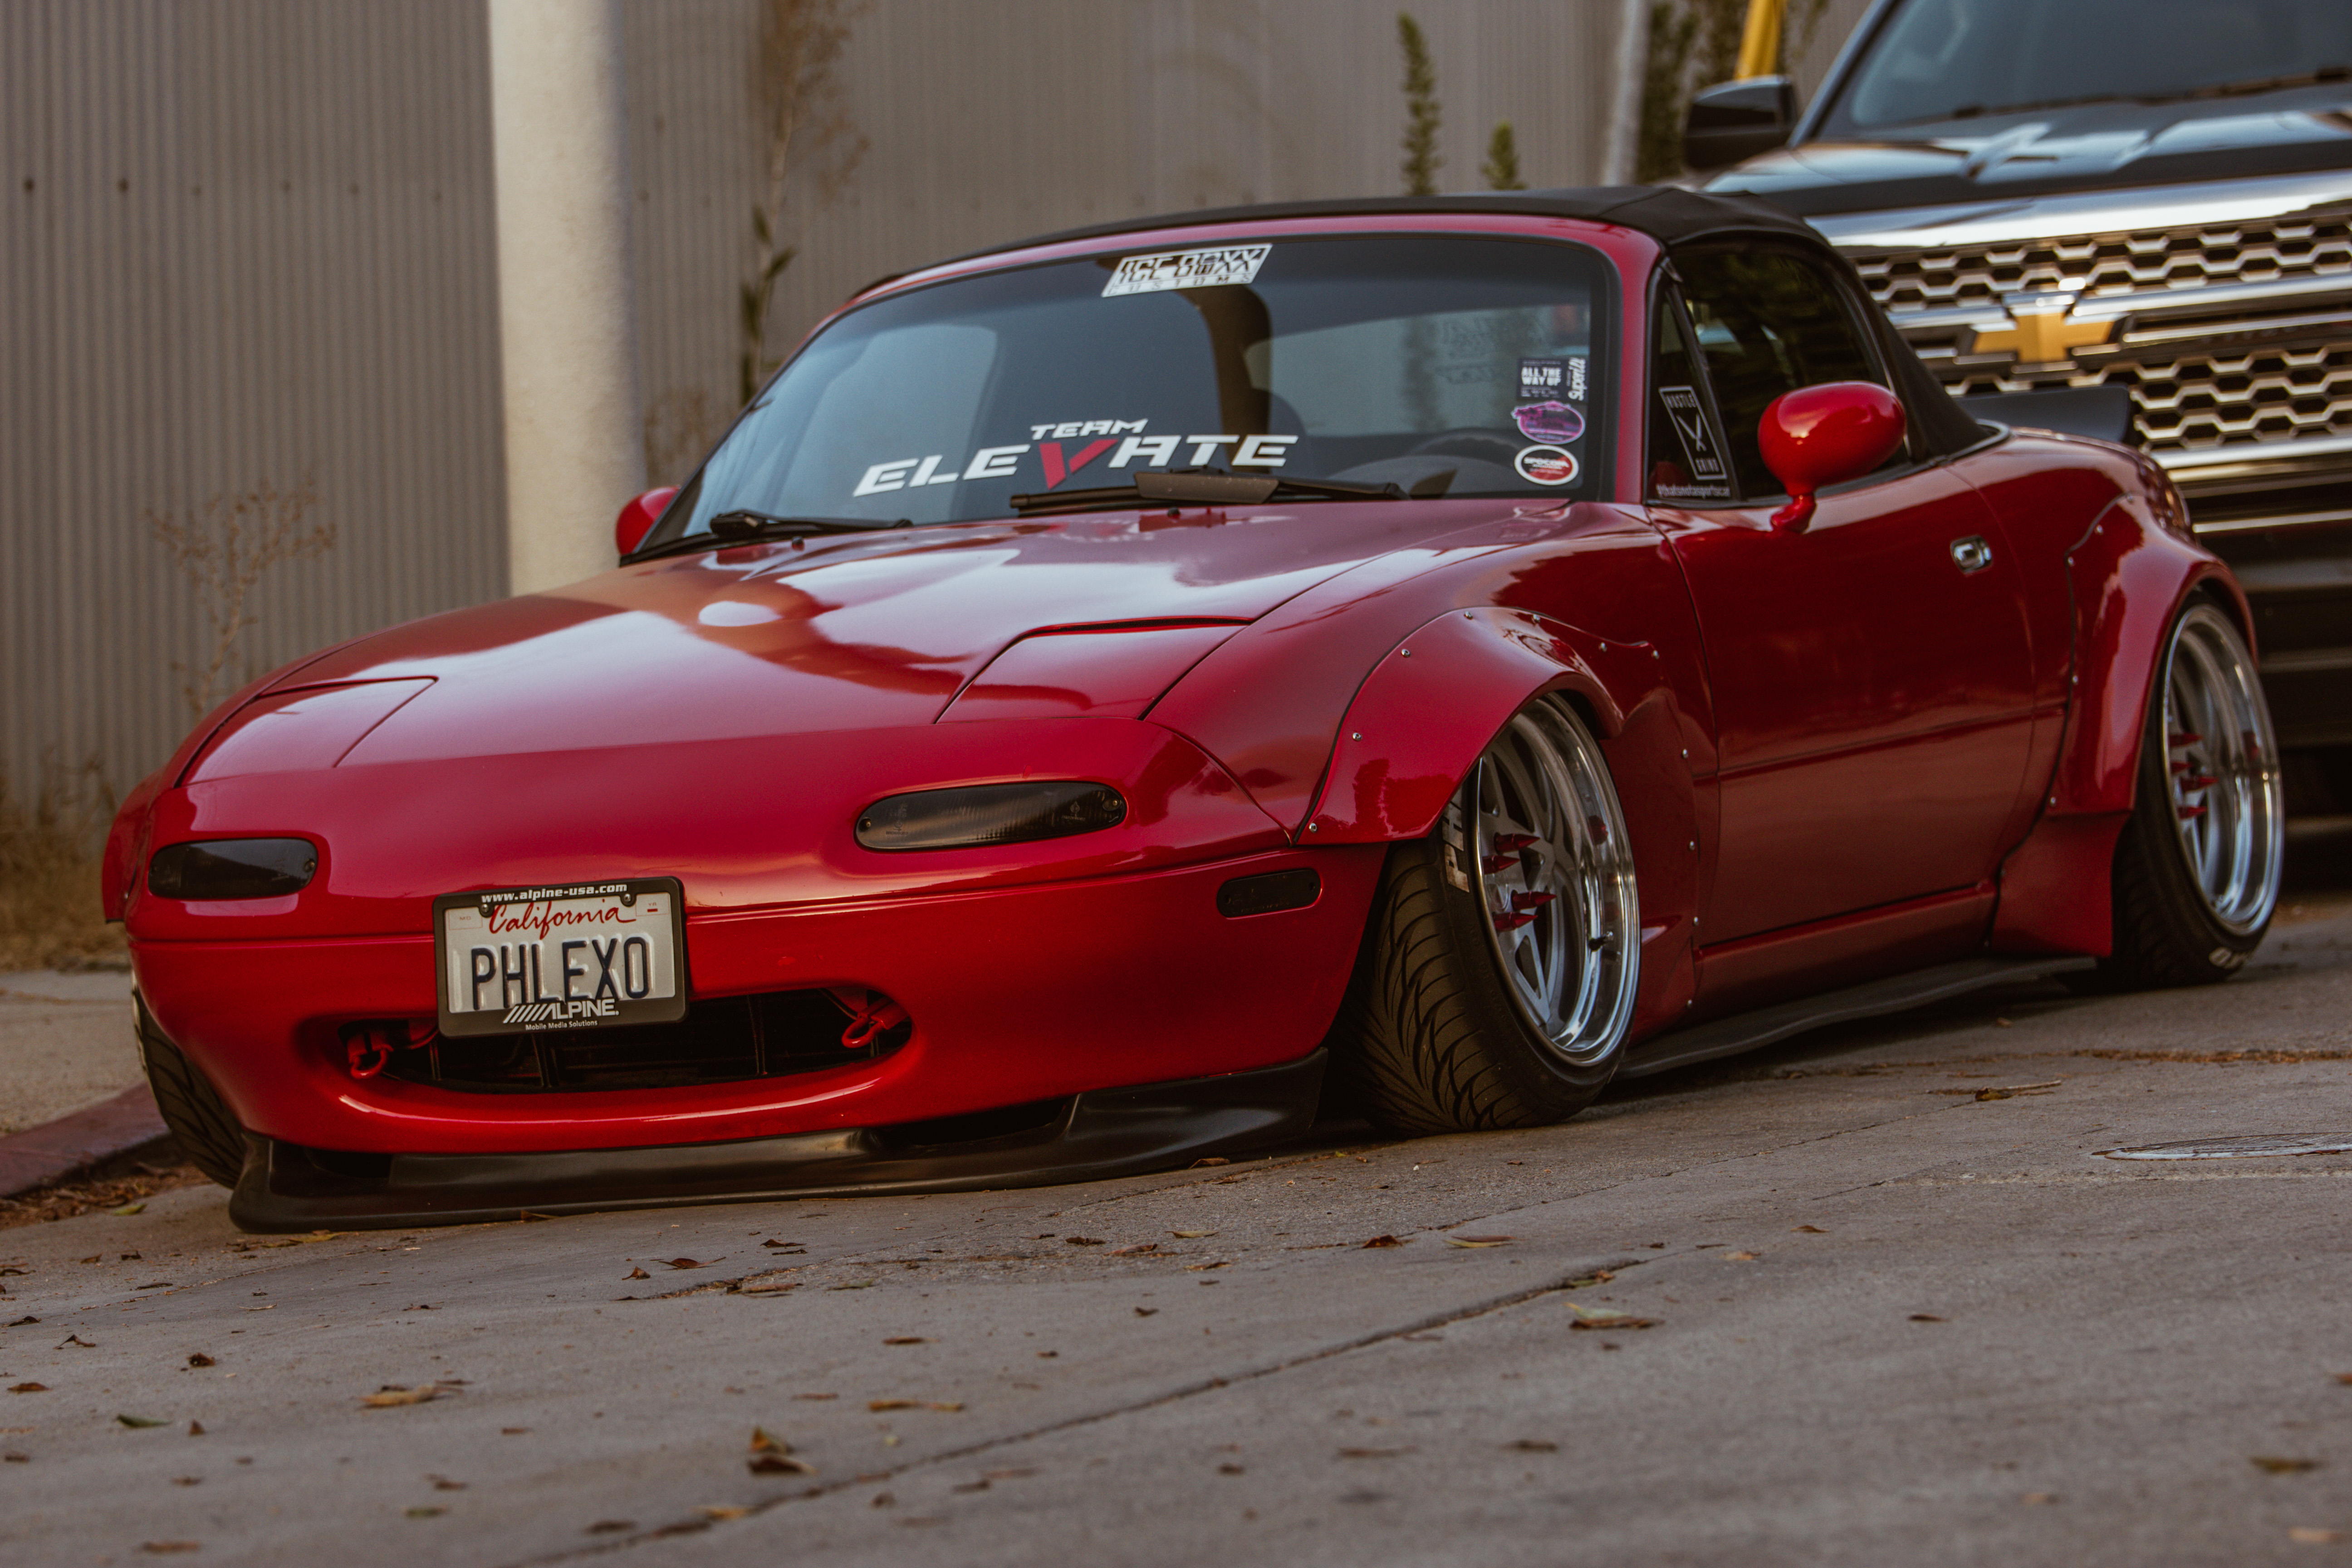 General 5184x3456 Mazda MX-5 widebody car red cars vehicle pop-up headlights Mazda stanced convertible Japanese cars bodykit